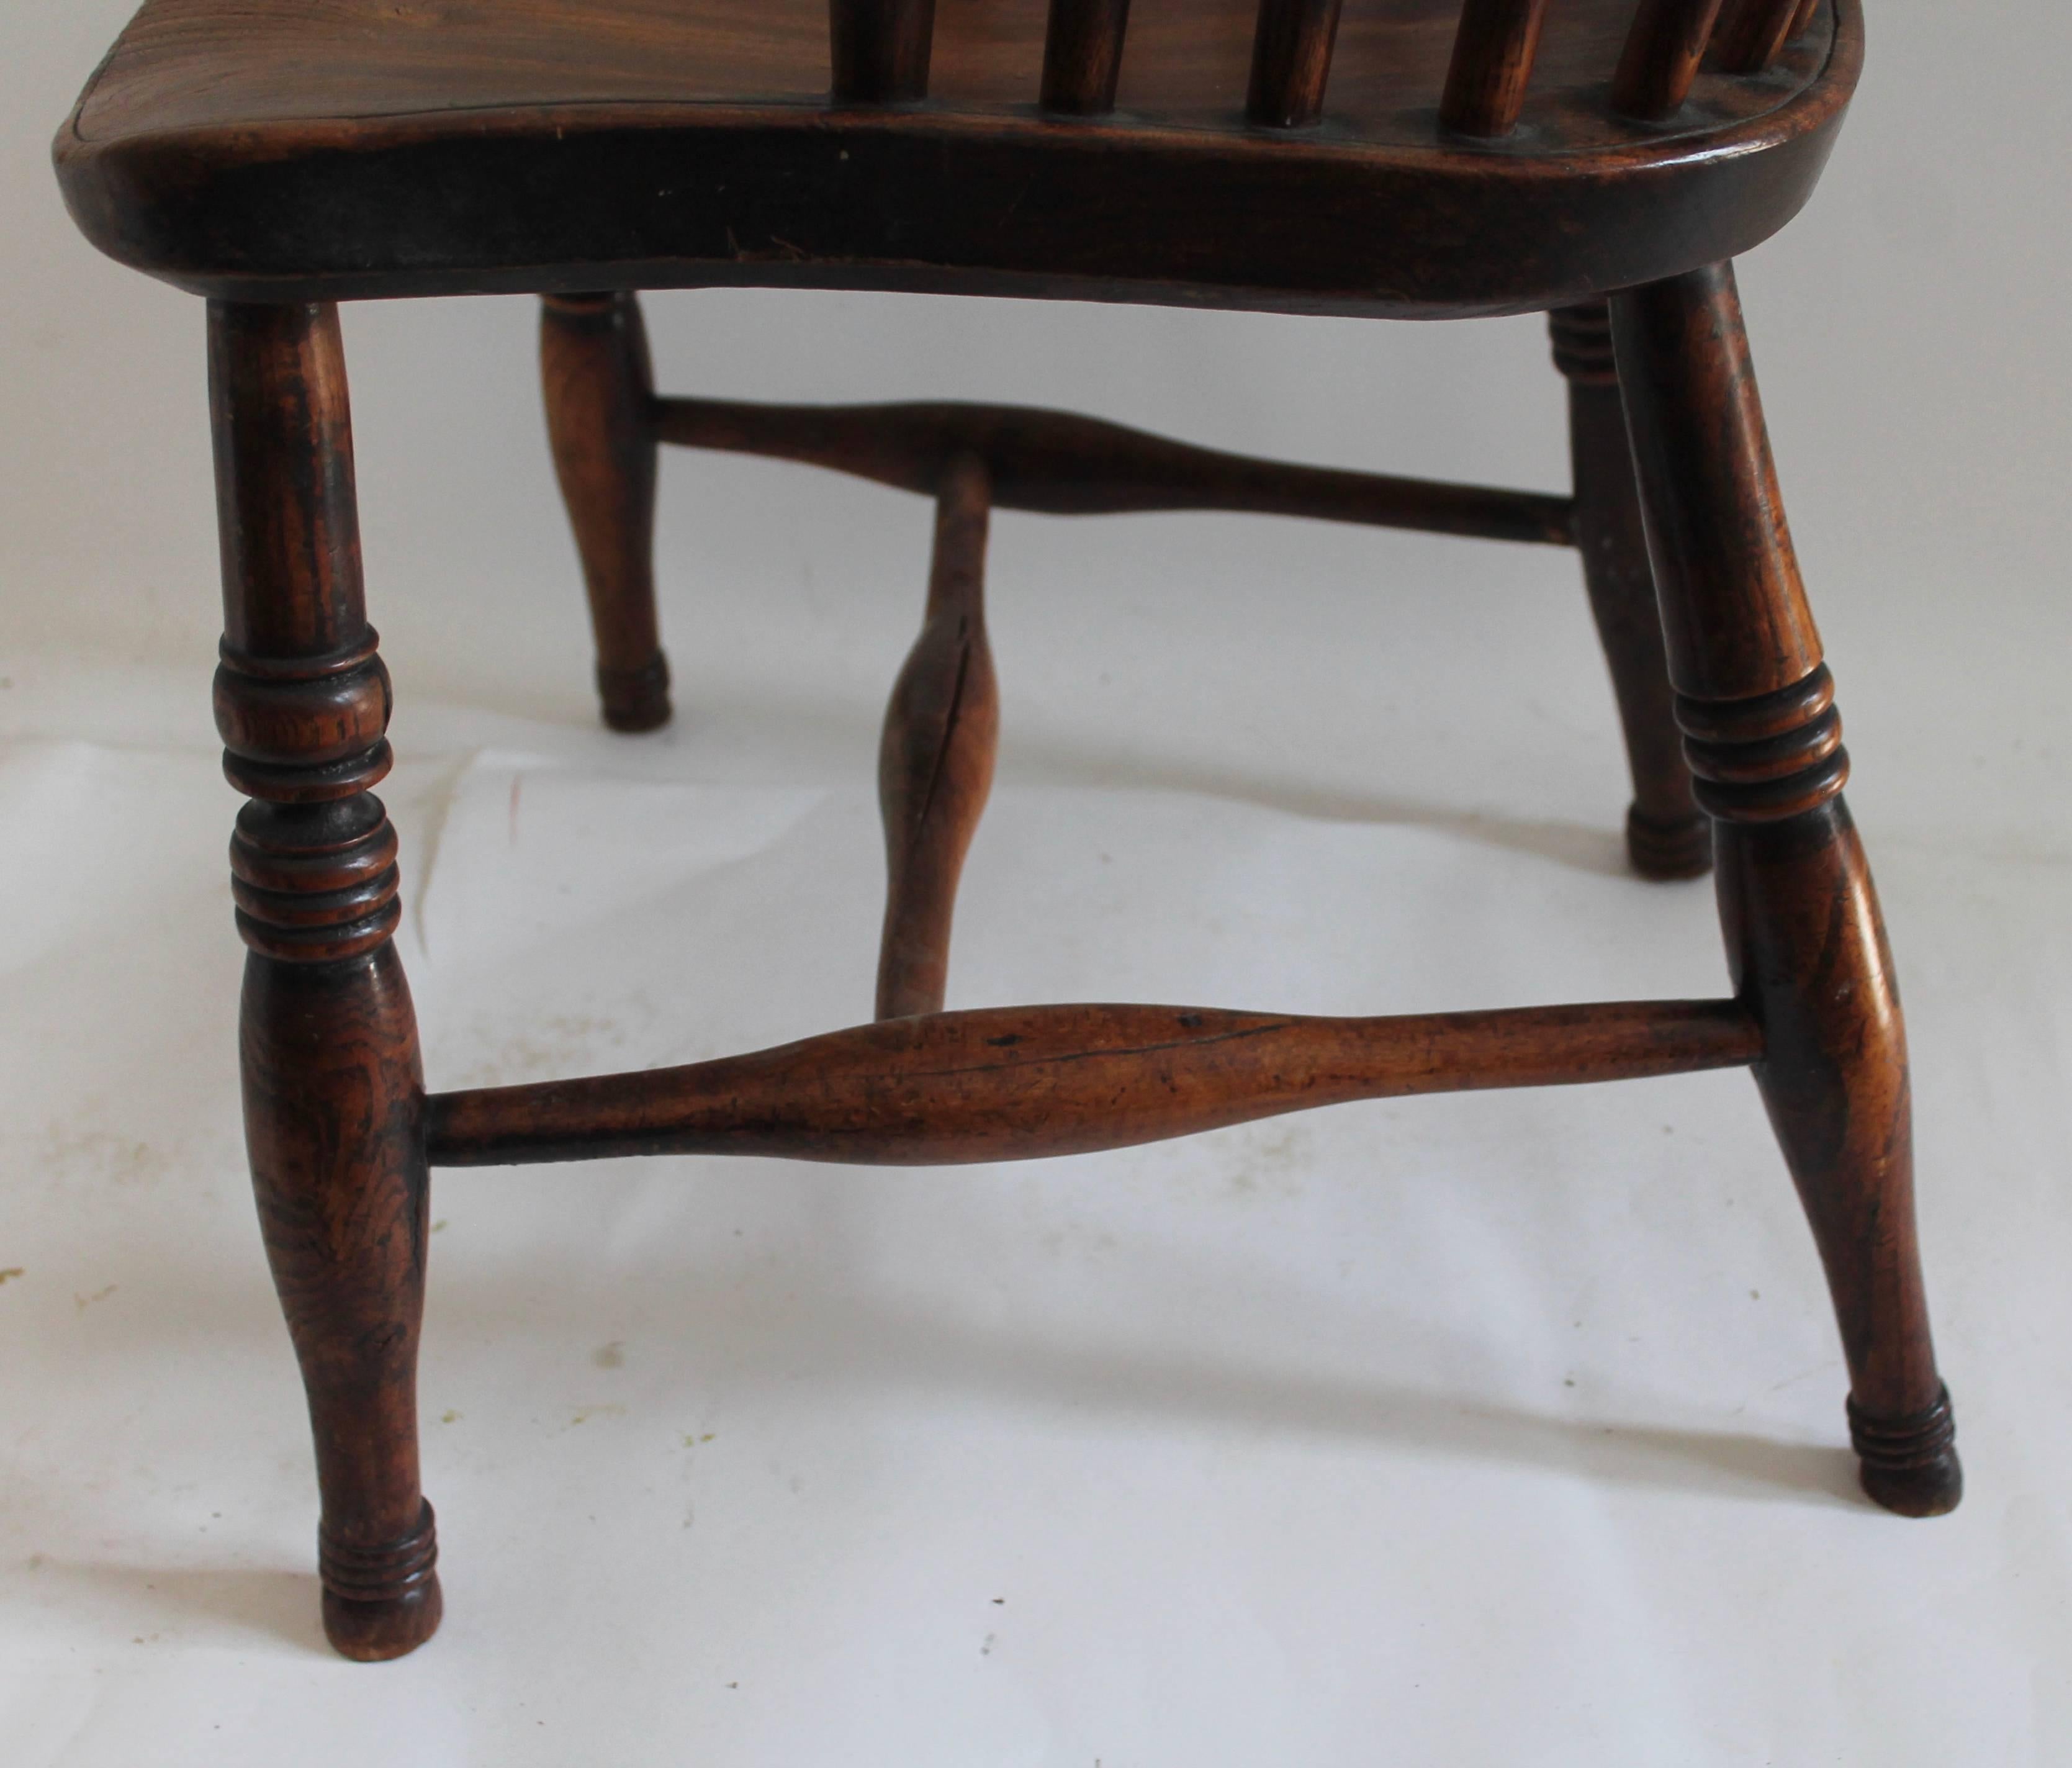 American Early 19th Century English Windsor Chair with Star Back Splash